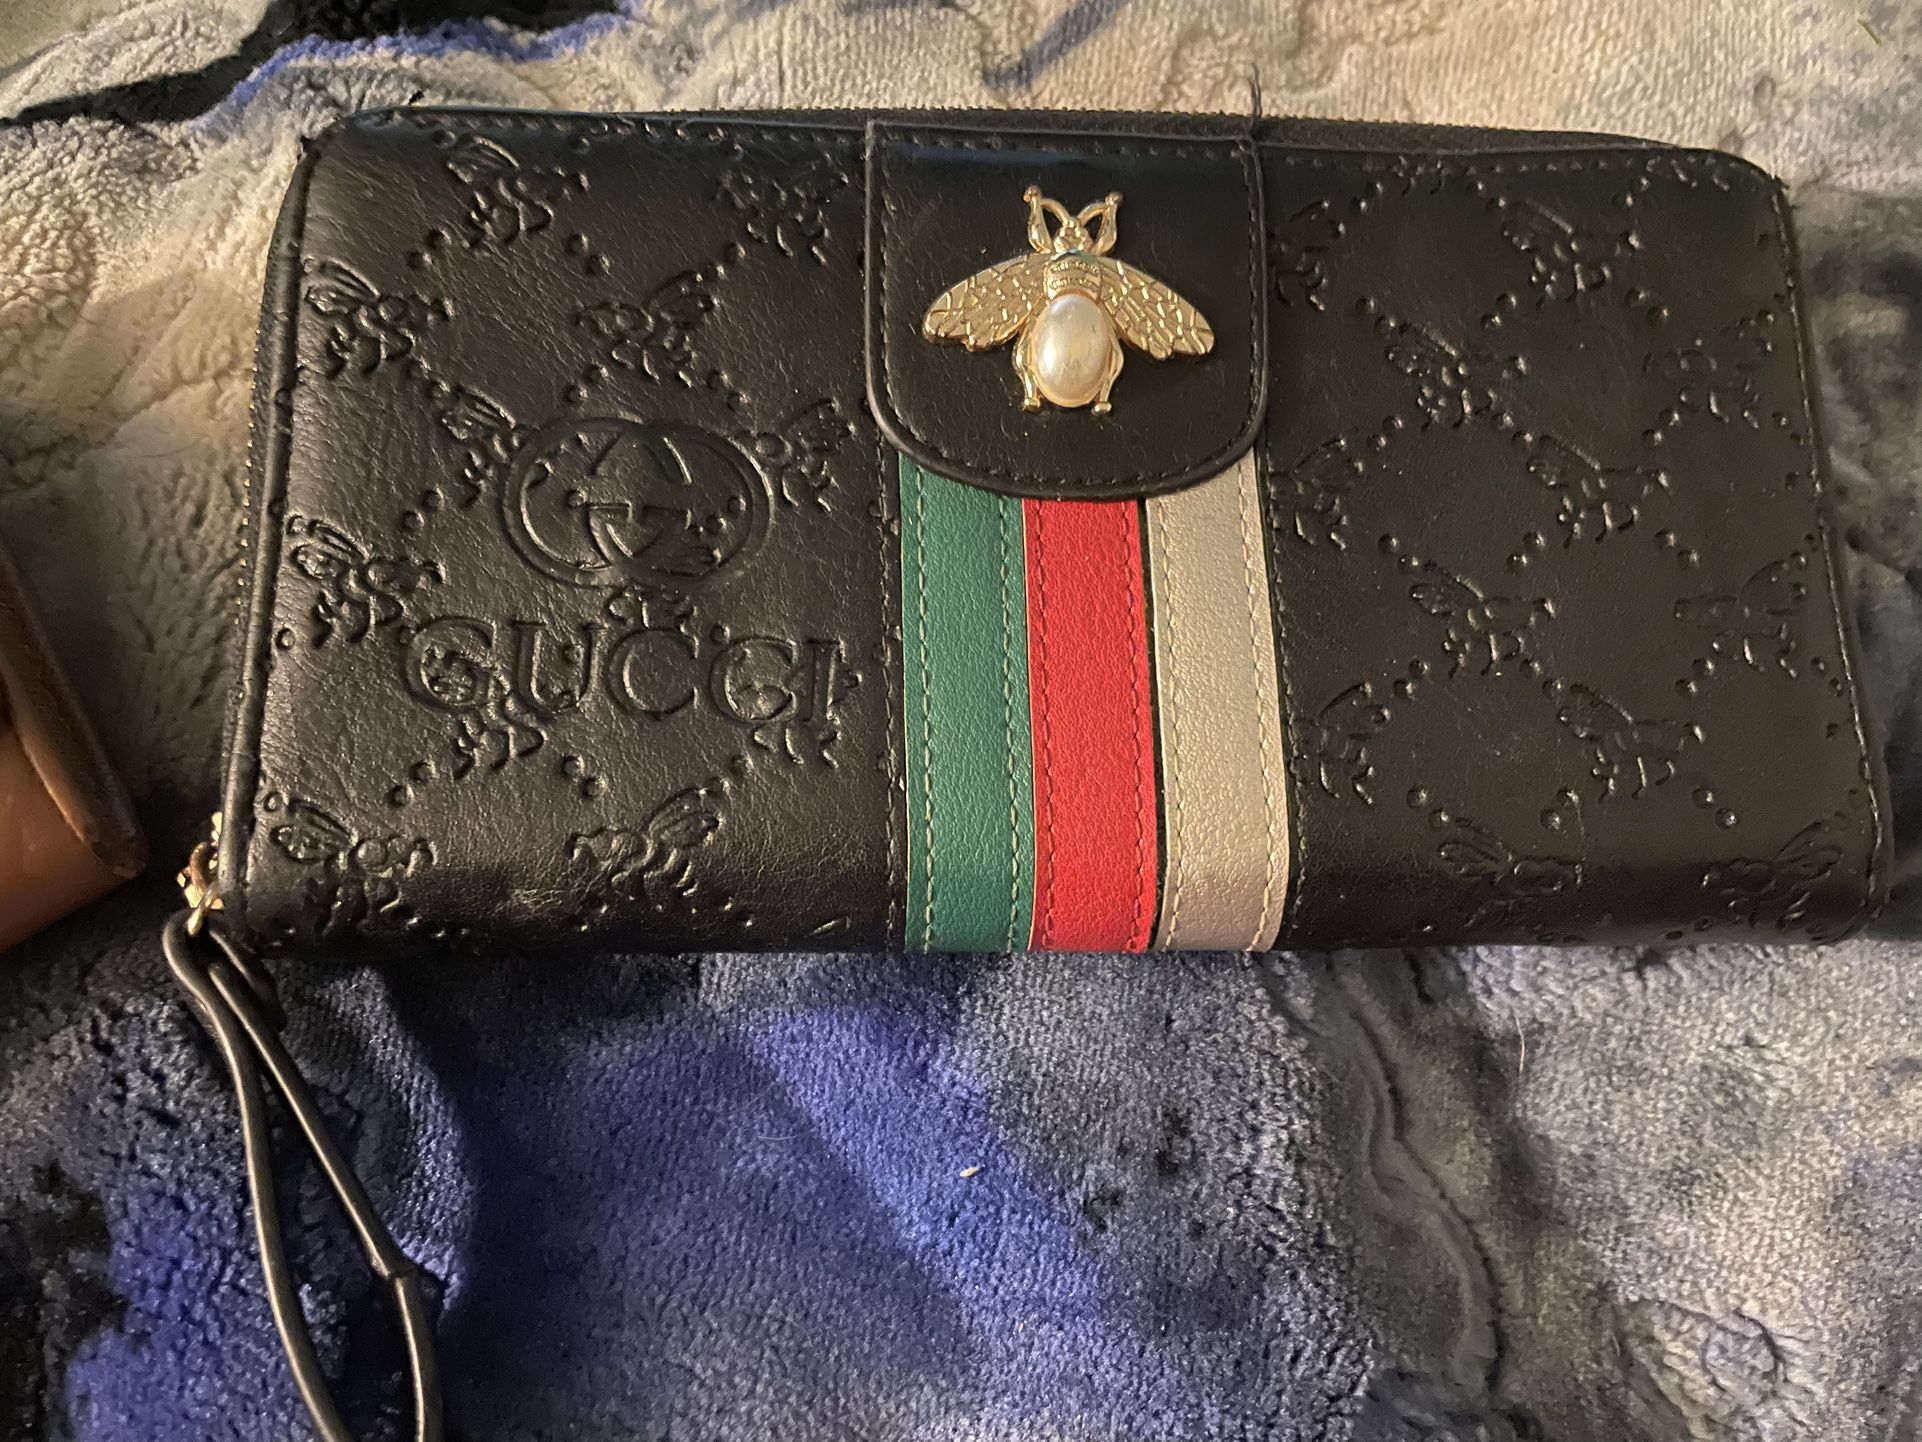 Name brand wallets